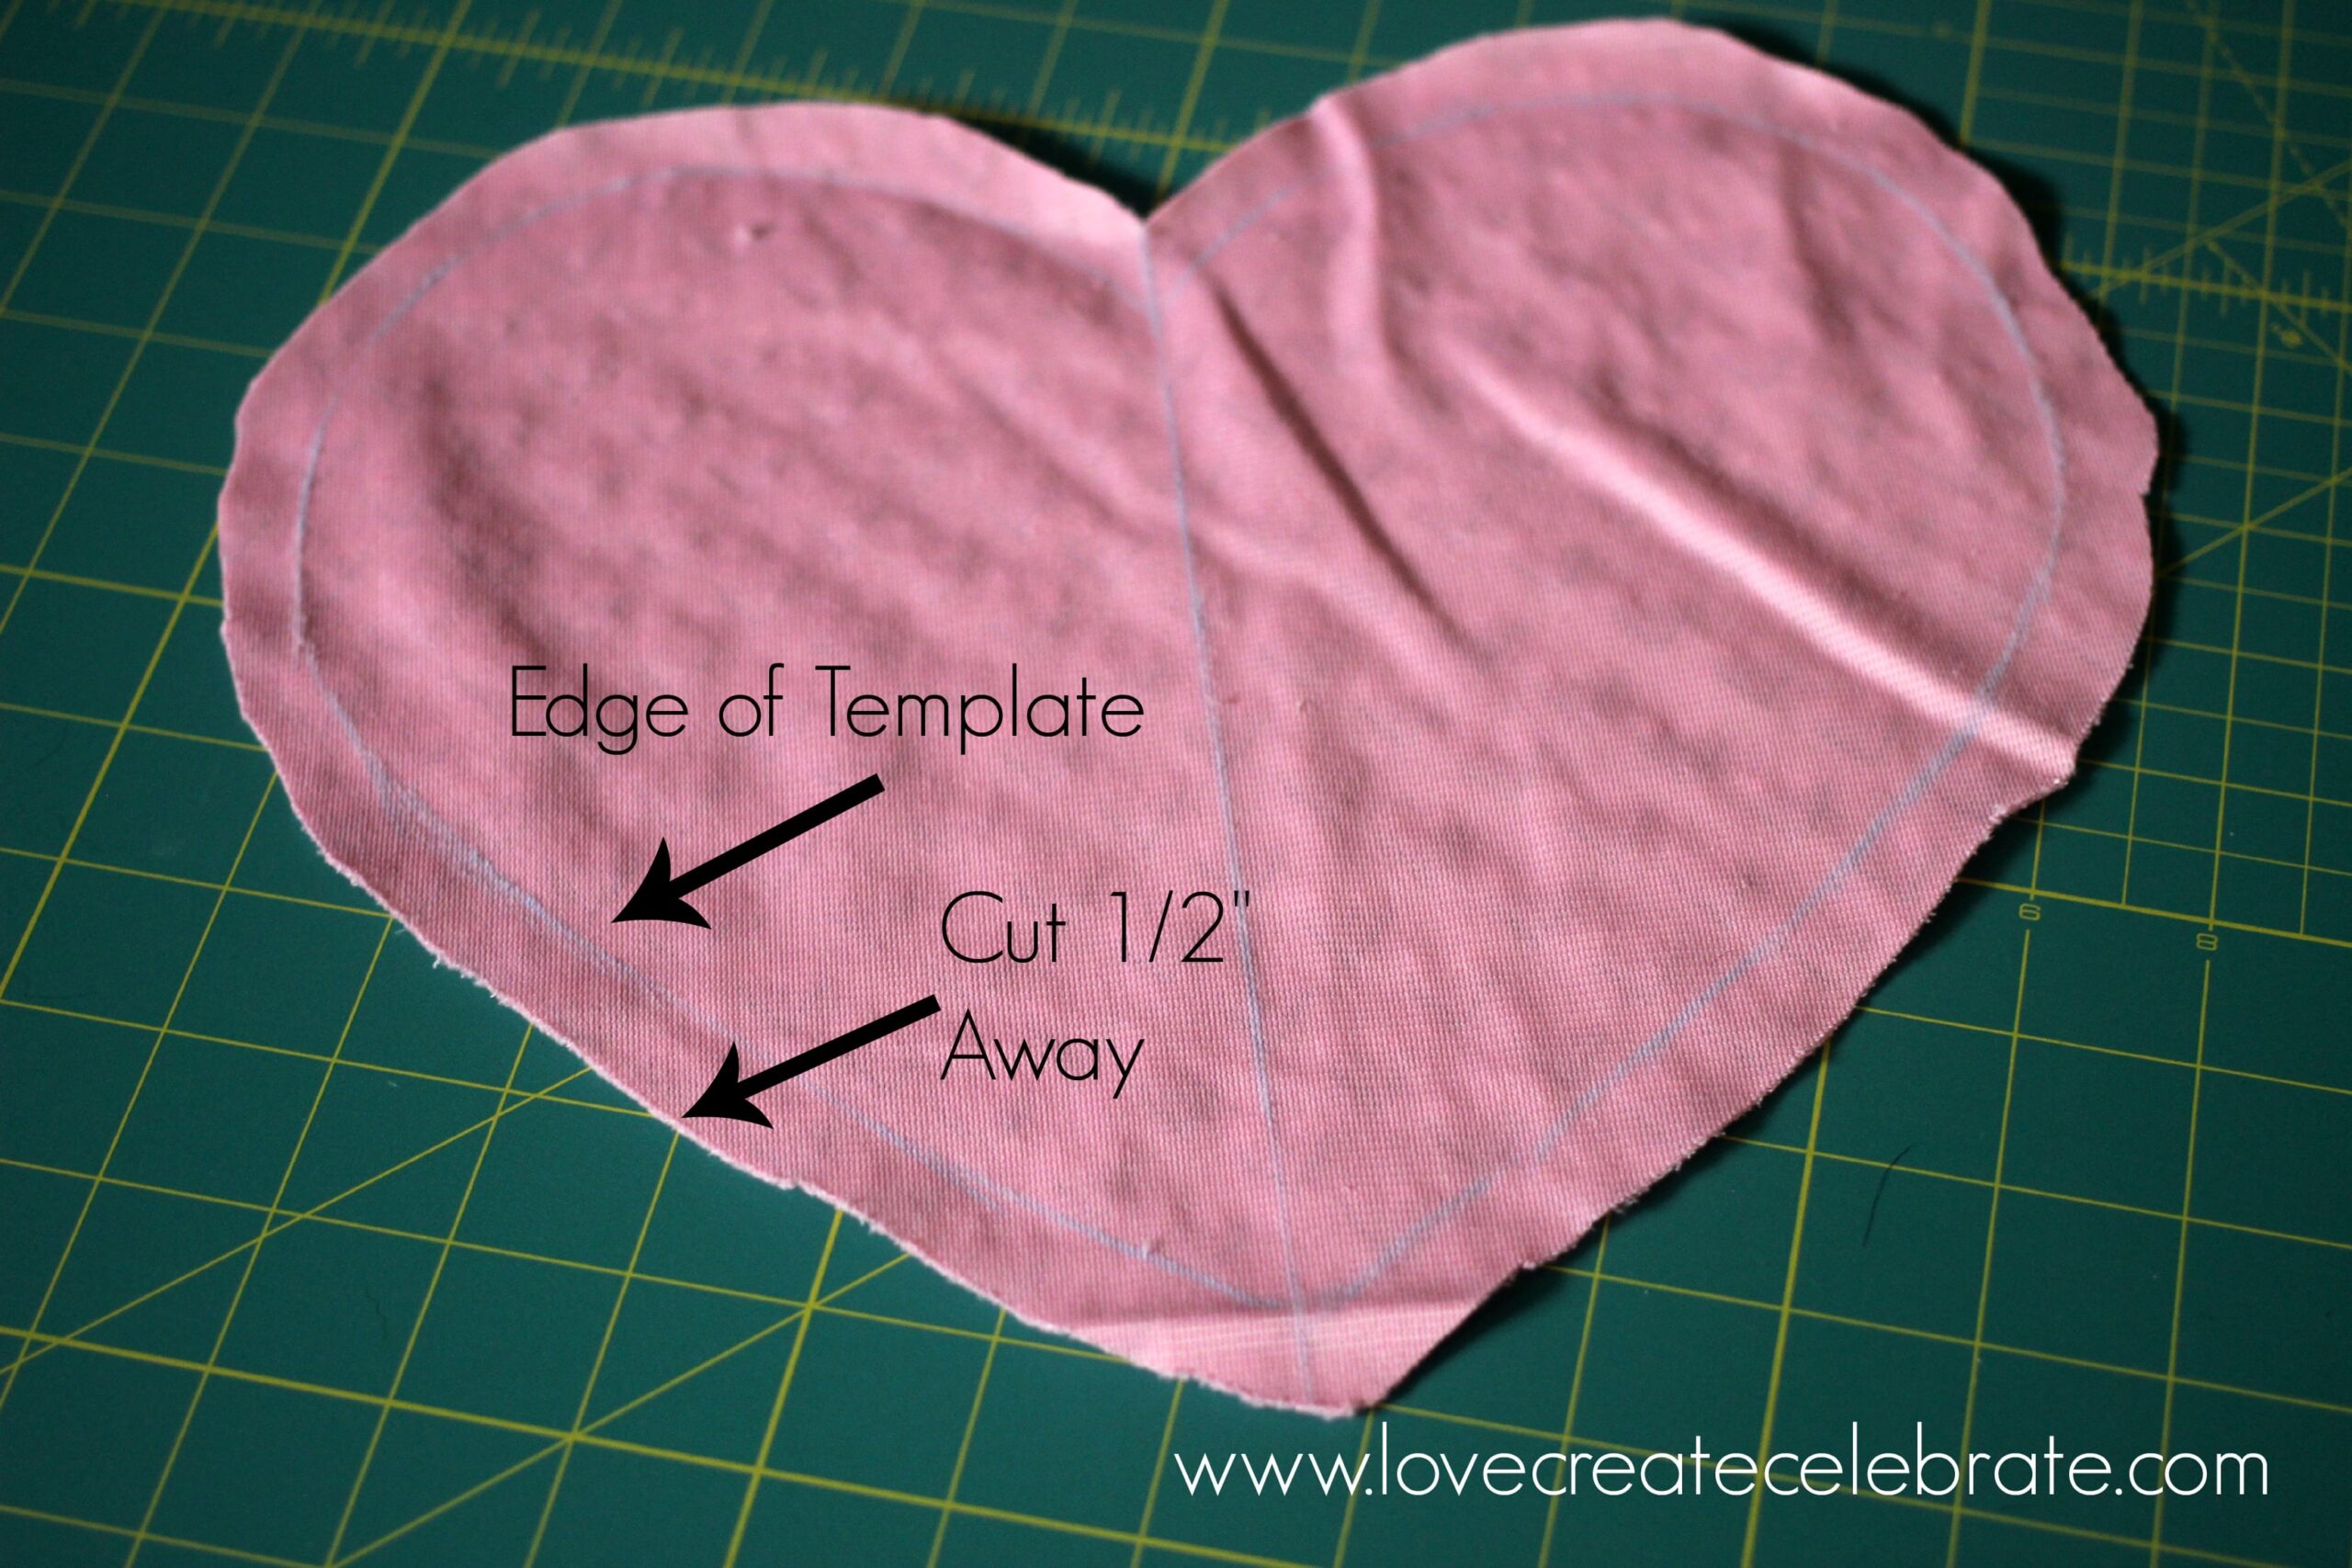 Make sure you cut a half inch away from the outline of the heart taggie blanket